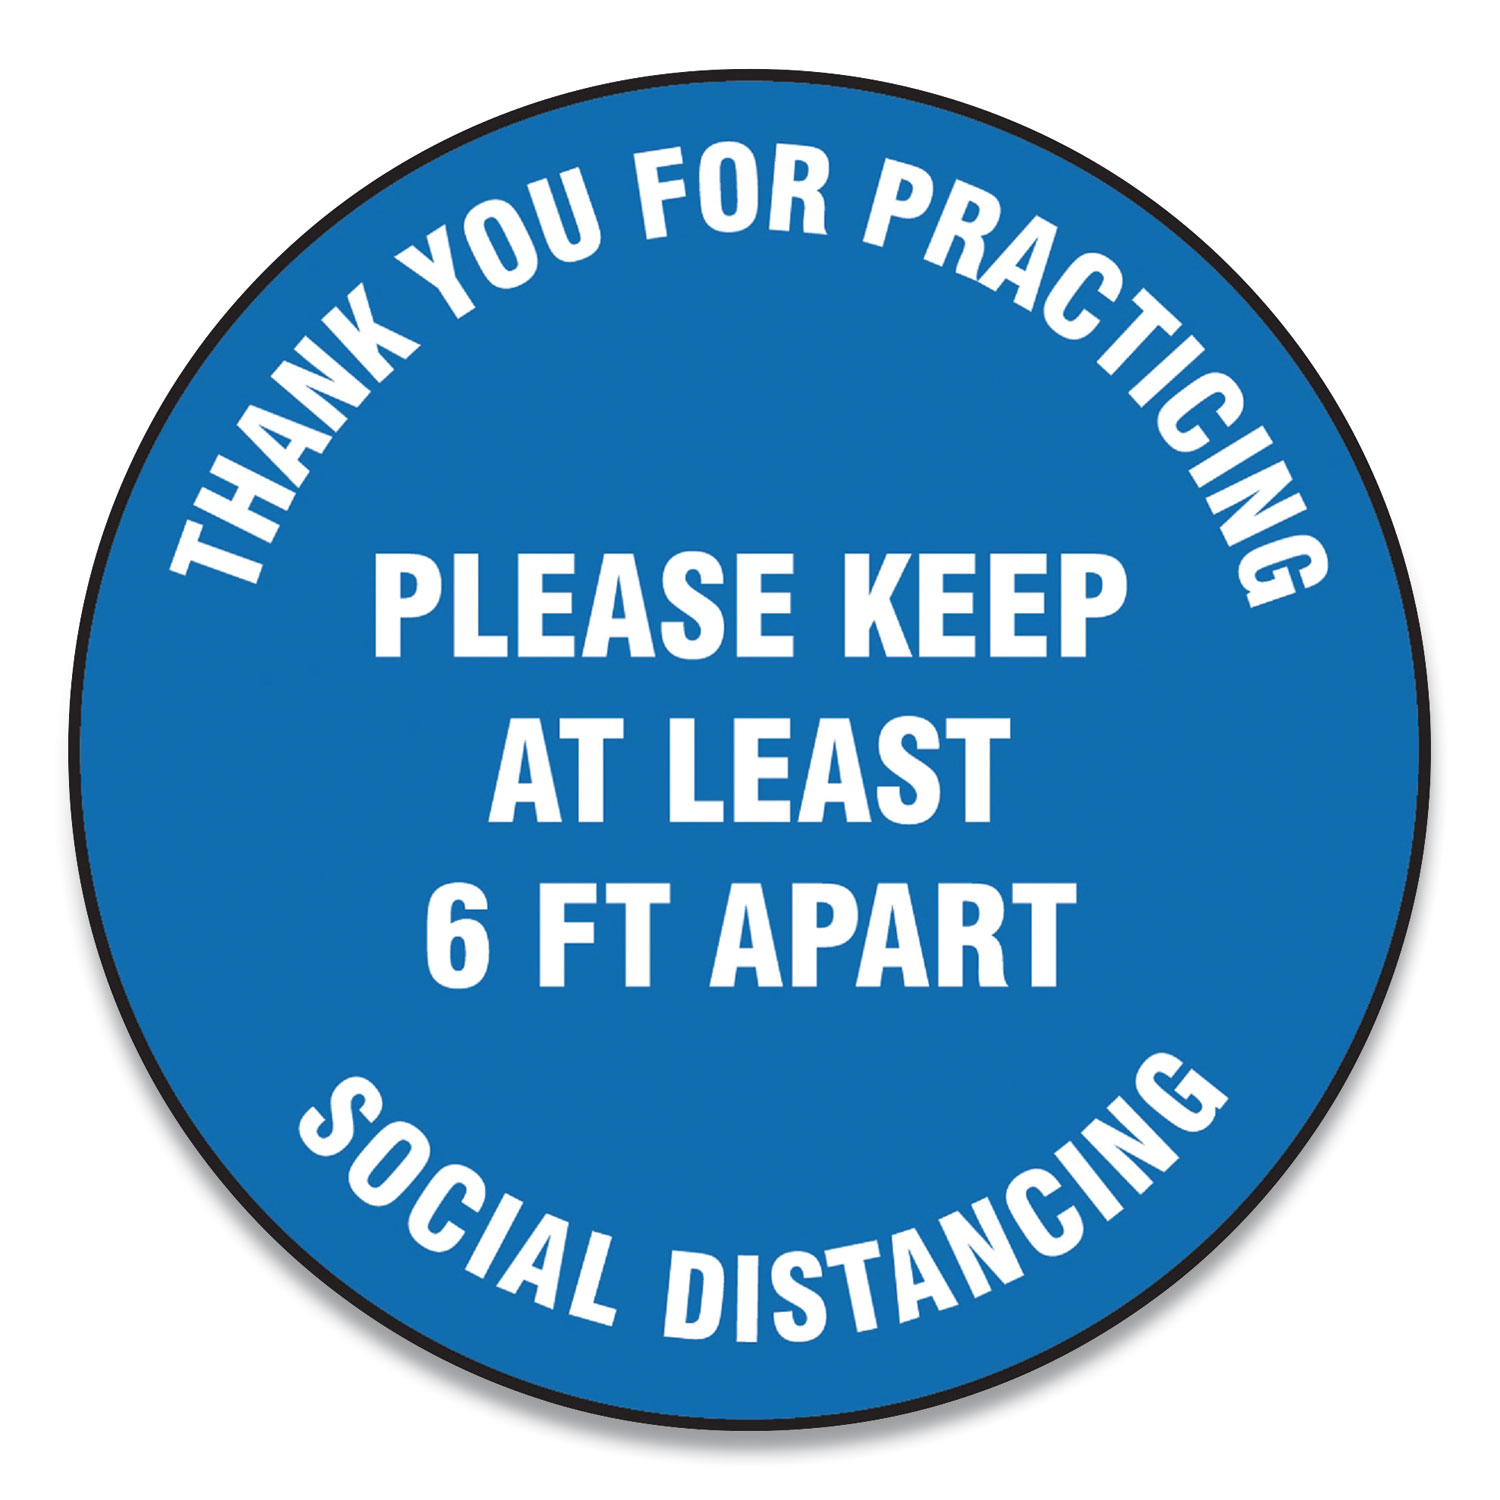  Accuform MFS420ESP Slip-Gard Floor Signs, 12 Circle, Thank You For Practicing Social Distancing Please Keep At Least 6 ft Apart, Blue, 25/PK (GN1MFS420ESP) 